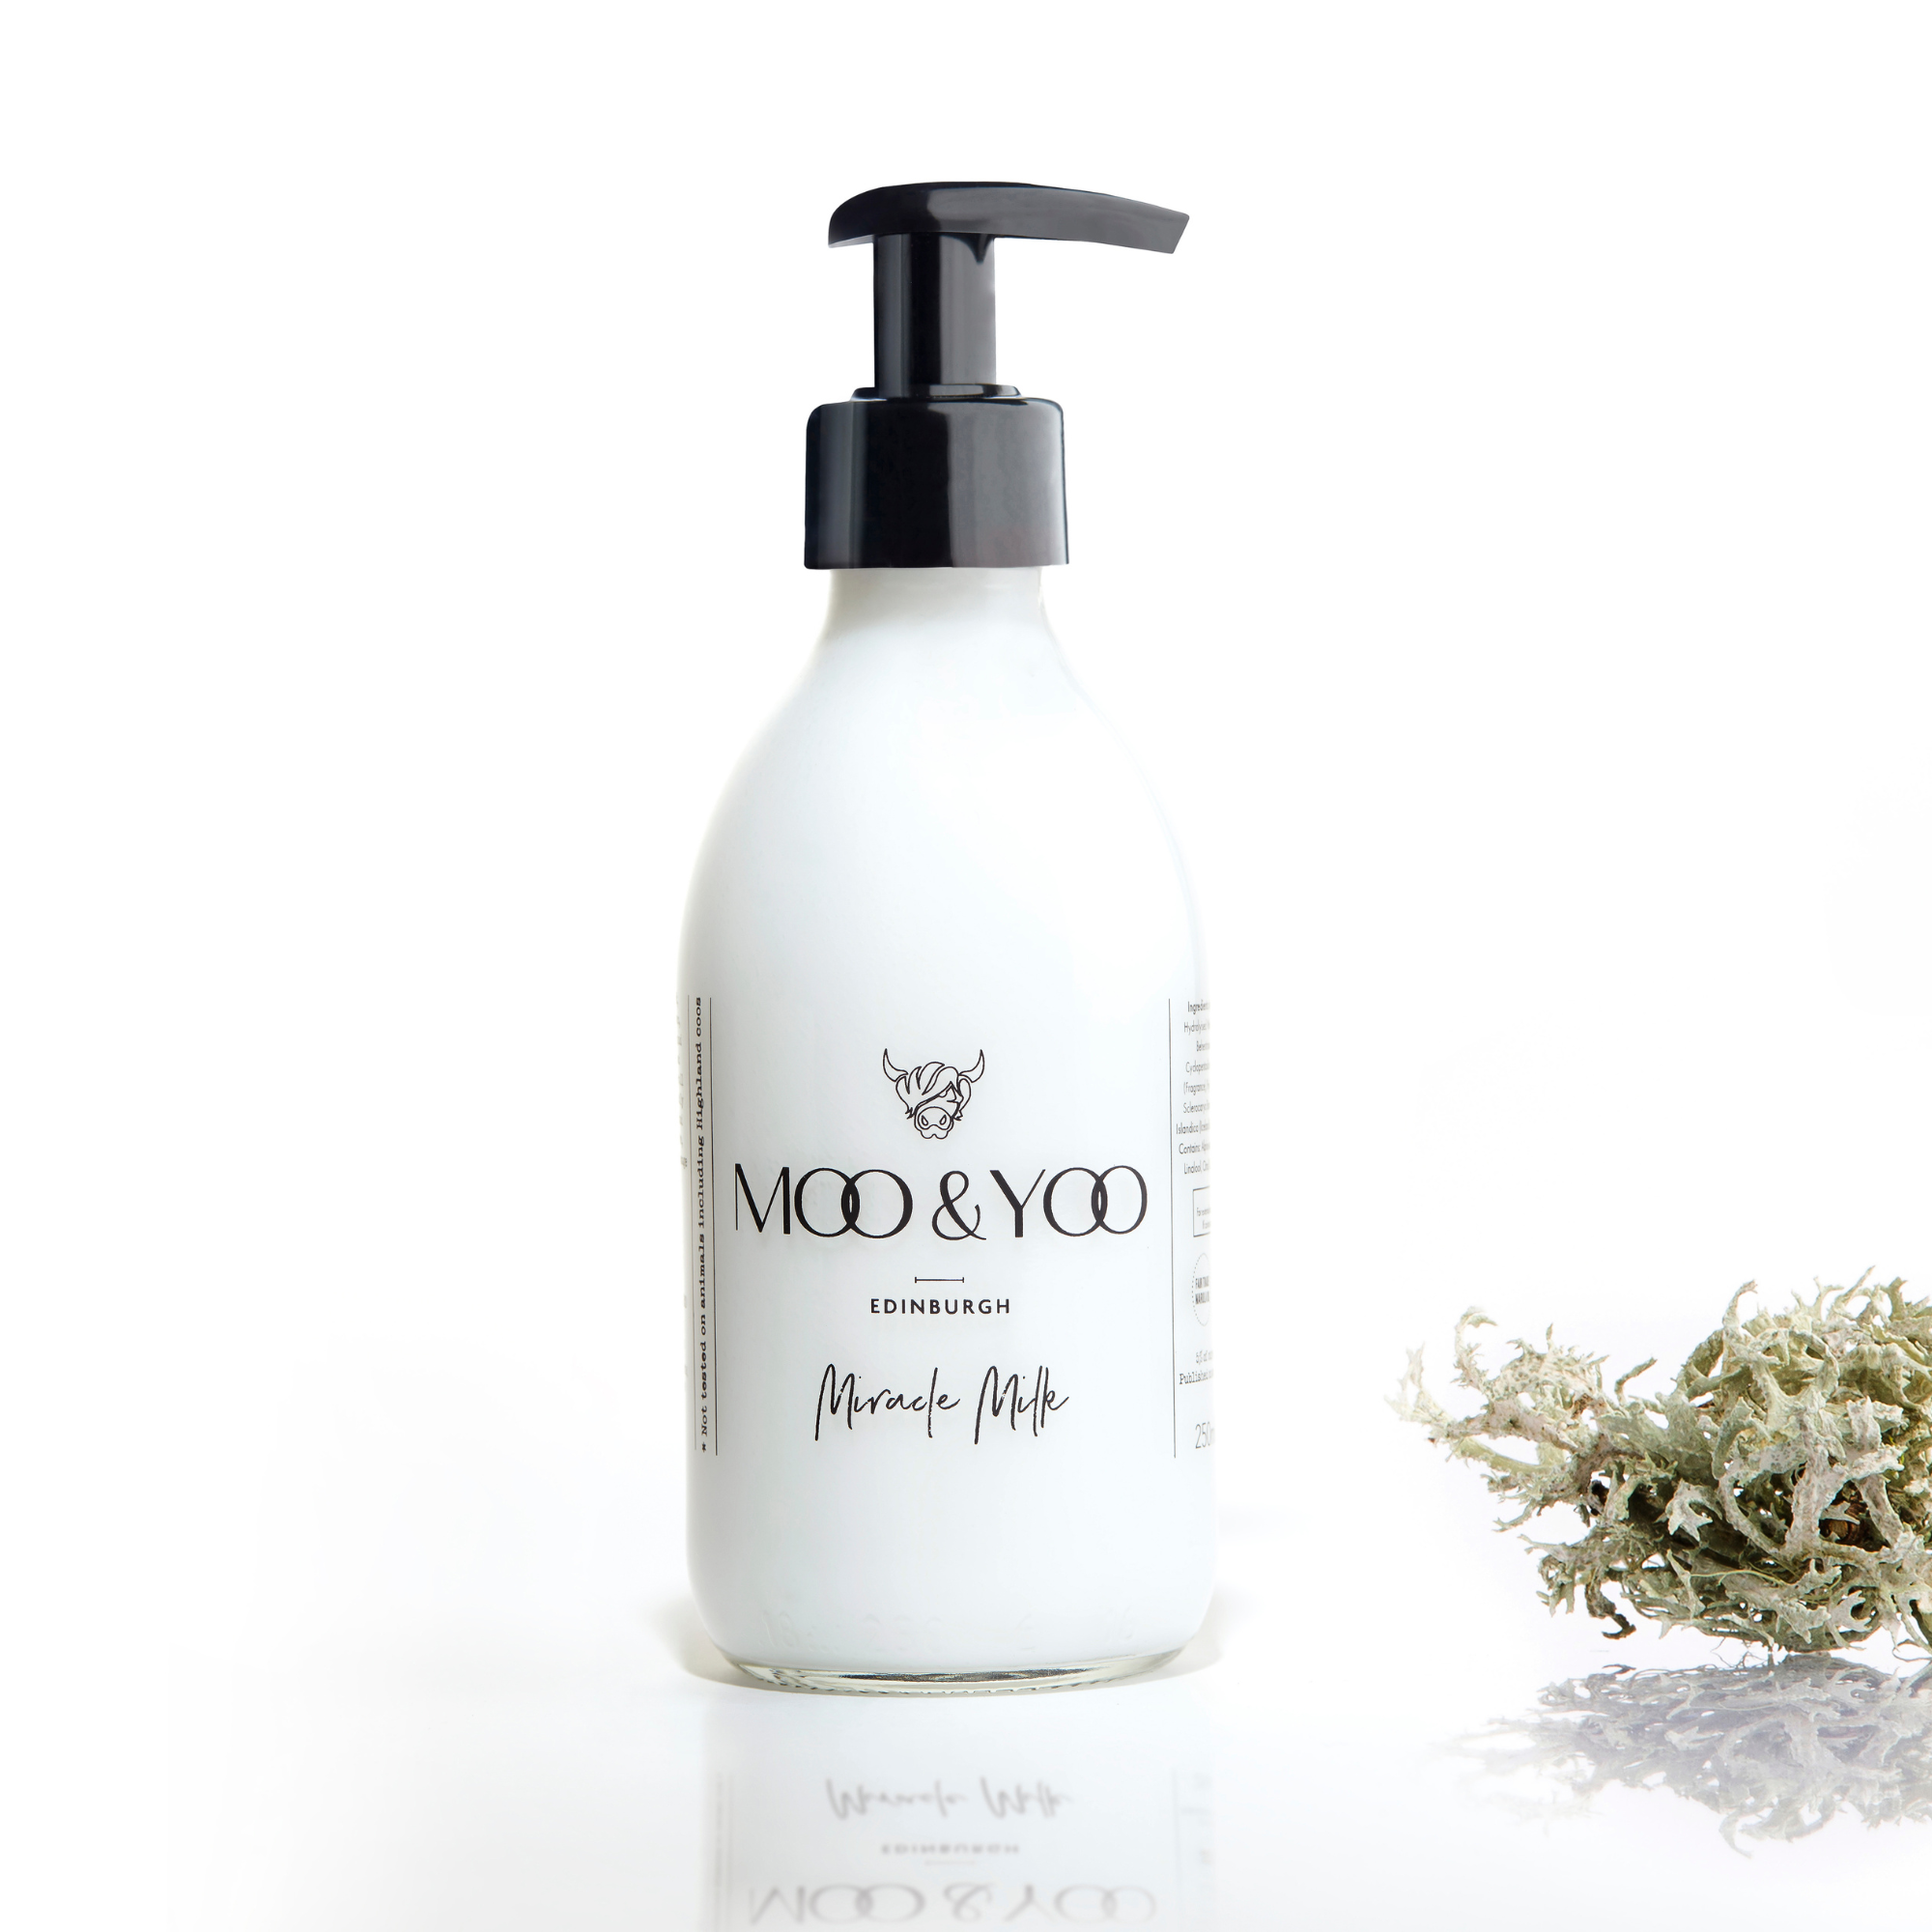 A glass bottle of Moo and Yoo Miracle Milk with a pump on a white background with a sprig of Icelandic moss placed to one side